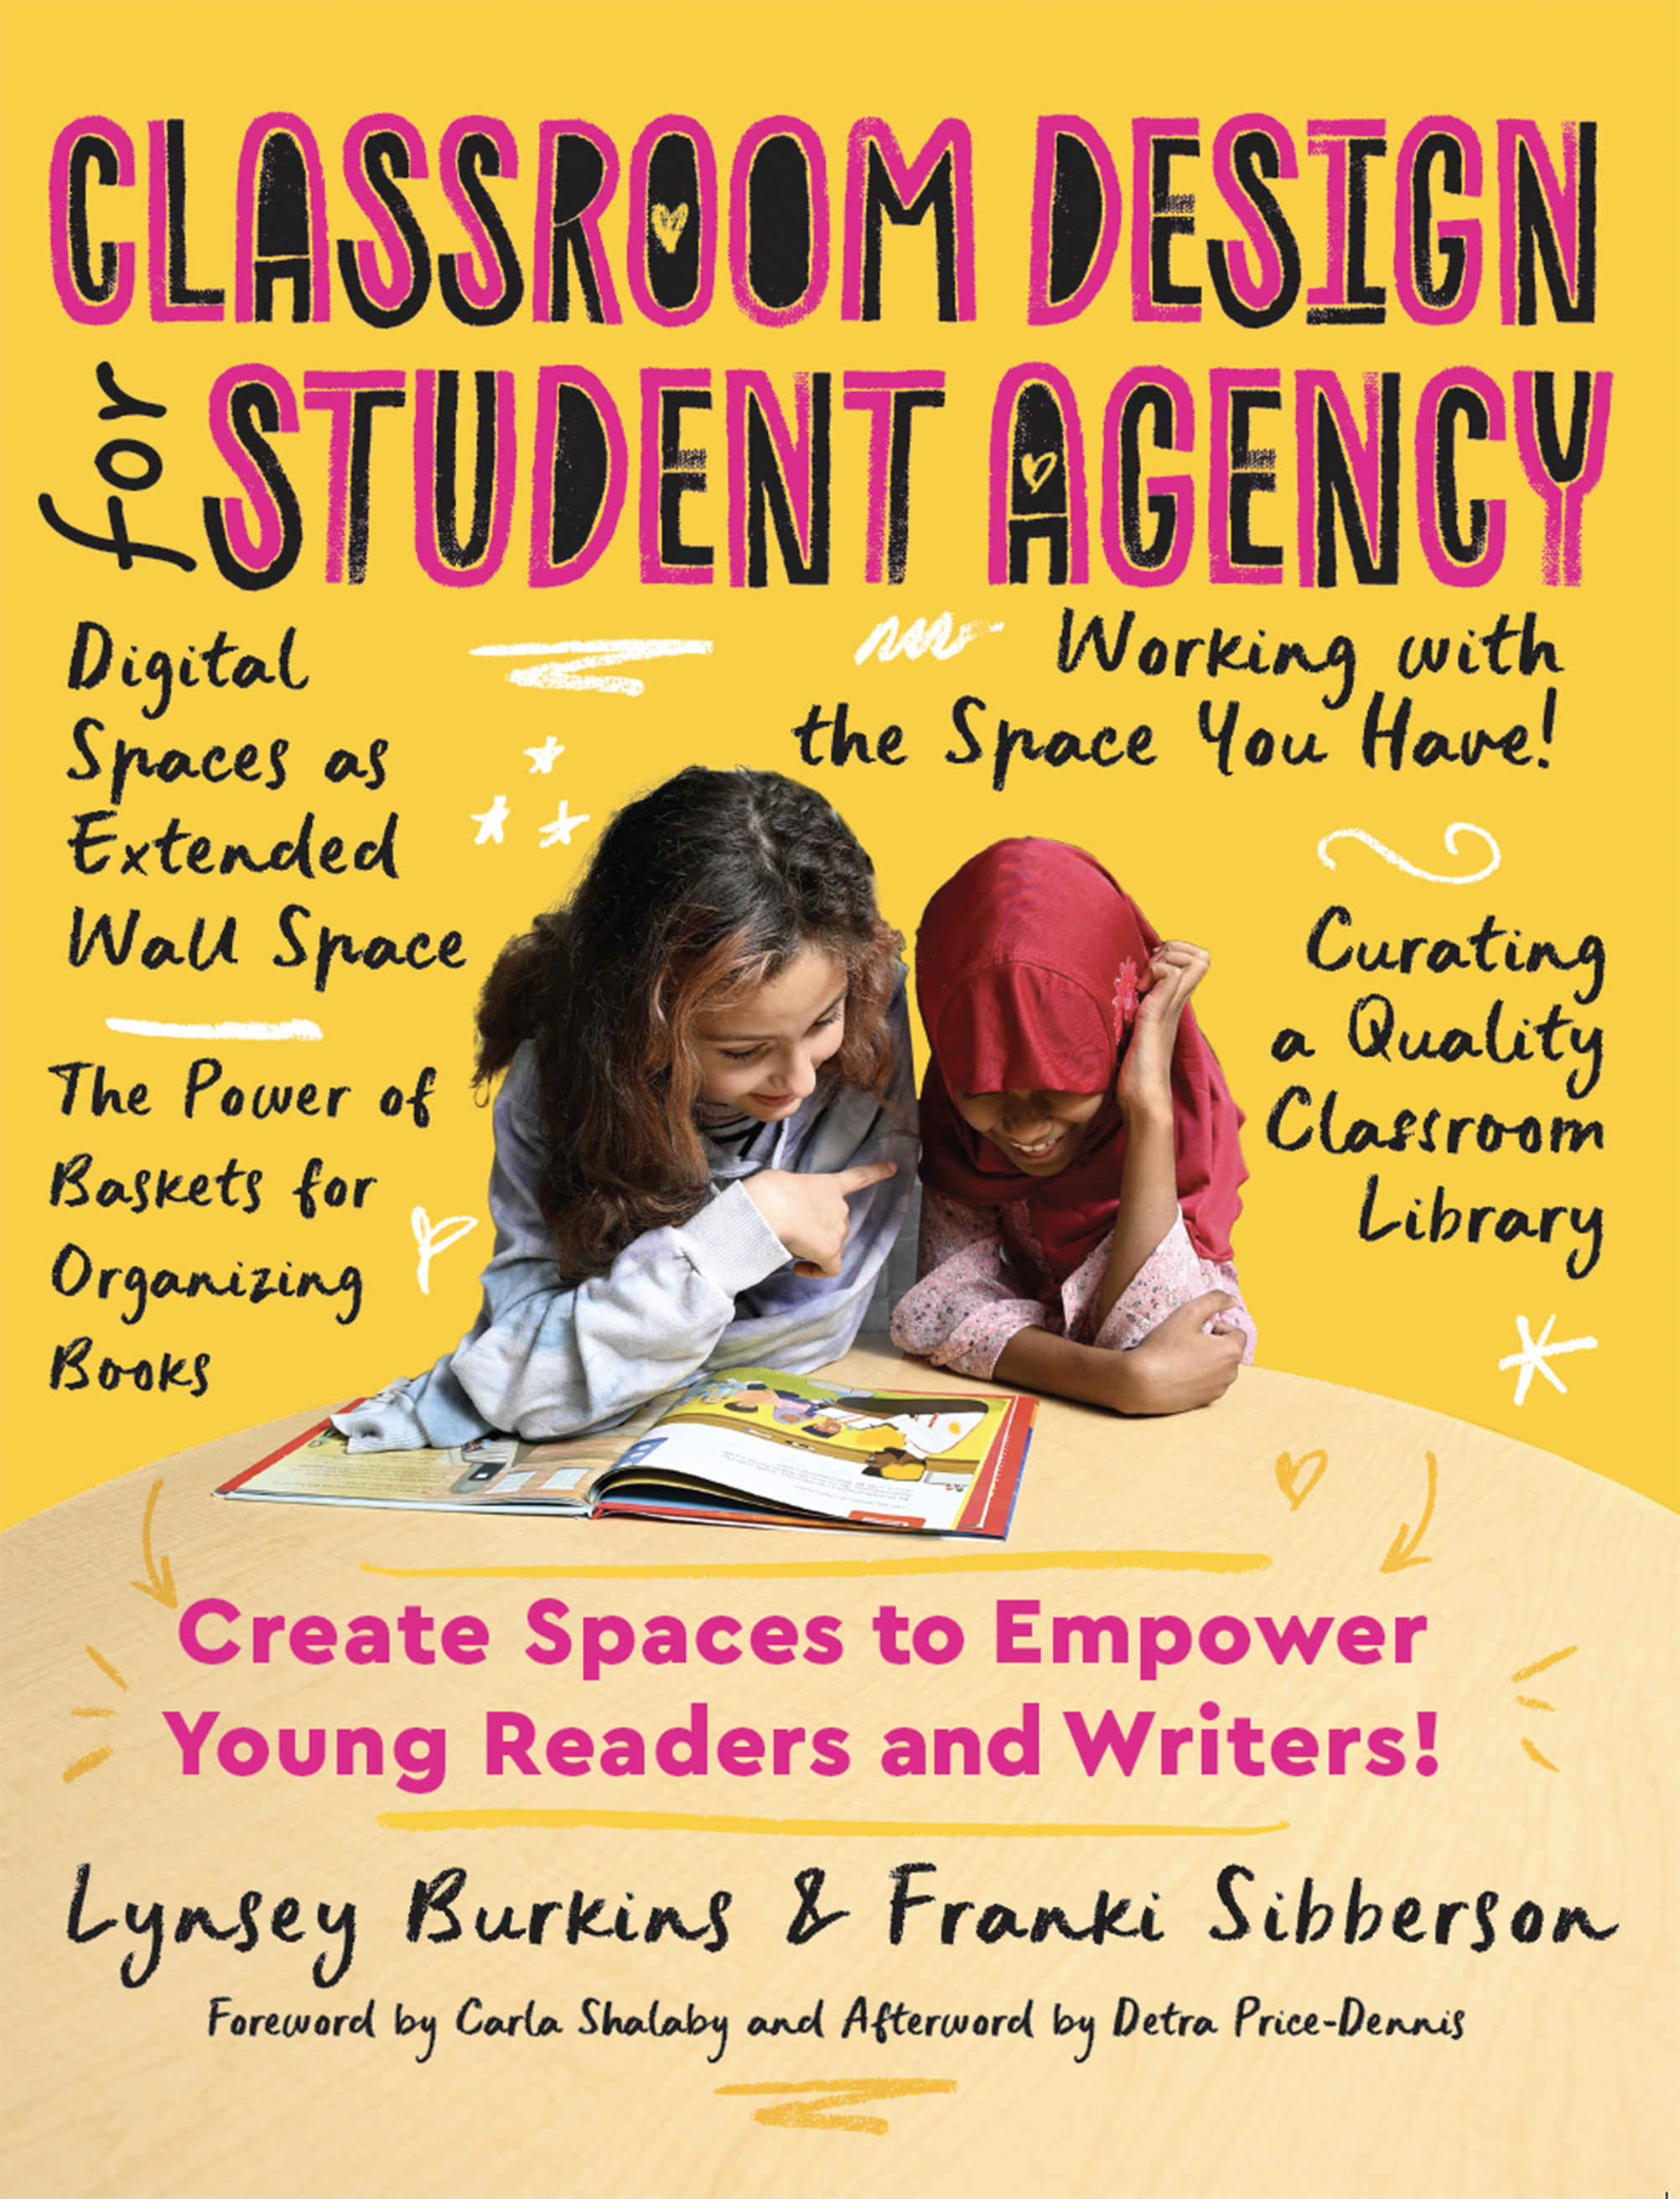 Front cover of the book Classroom Design for Student Agency.